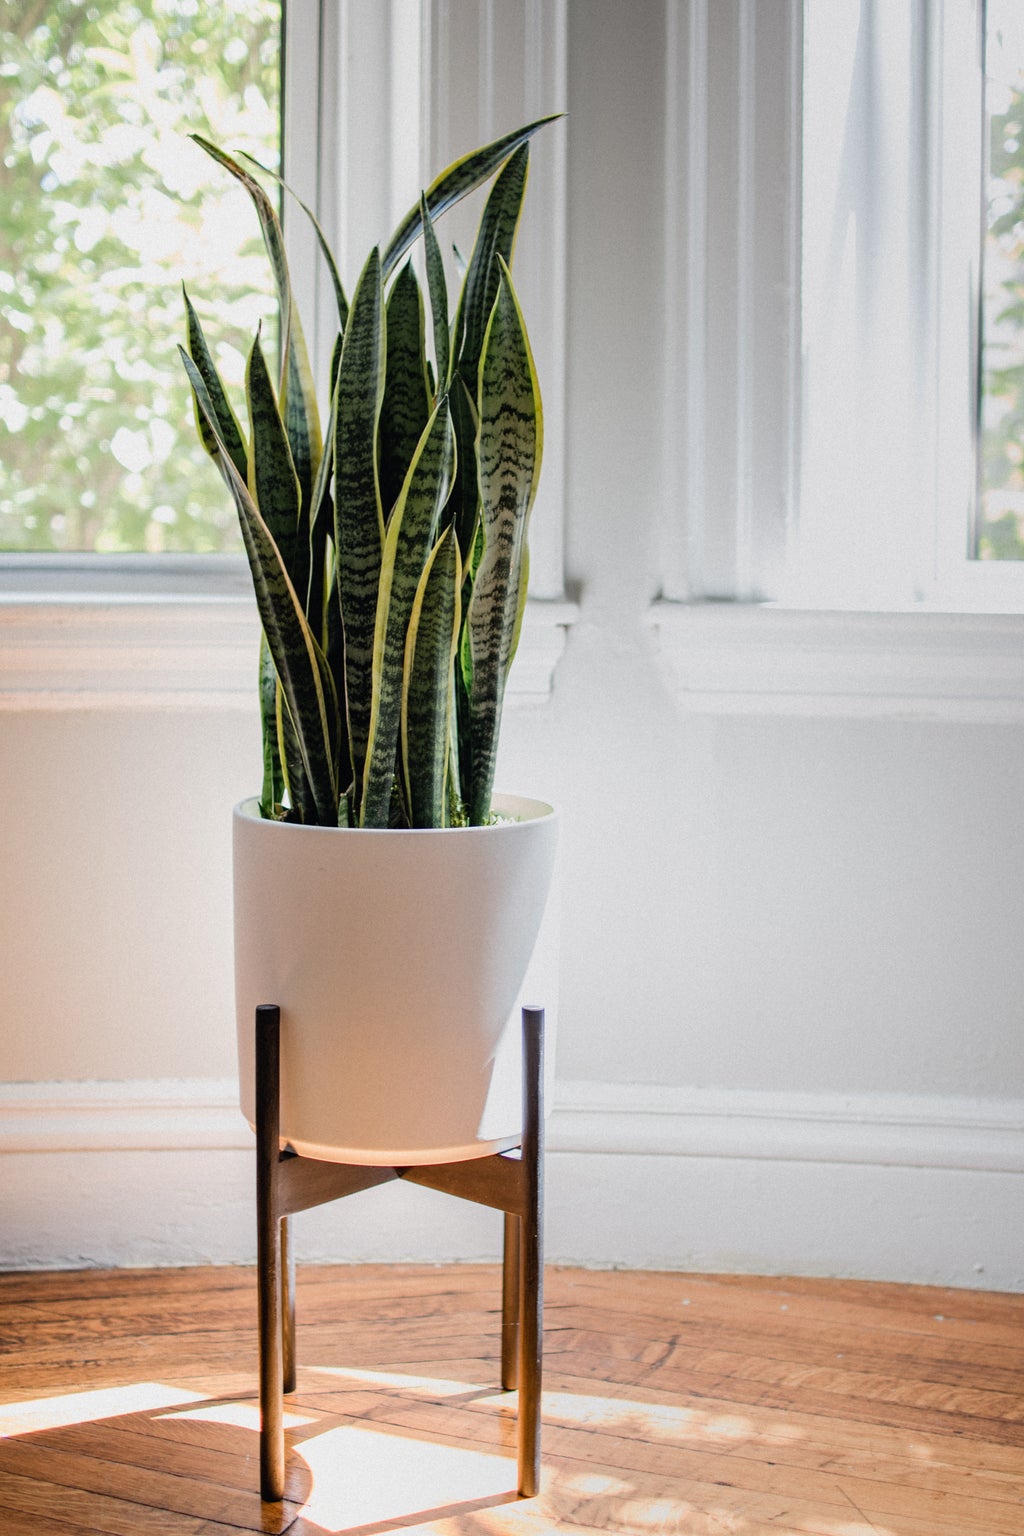 Snake plant by window